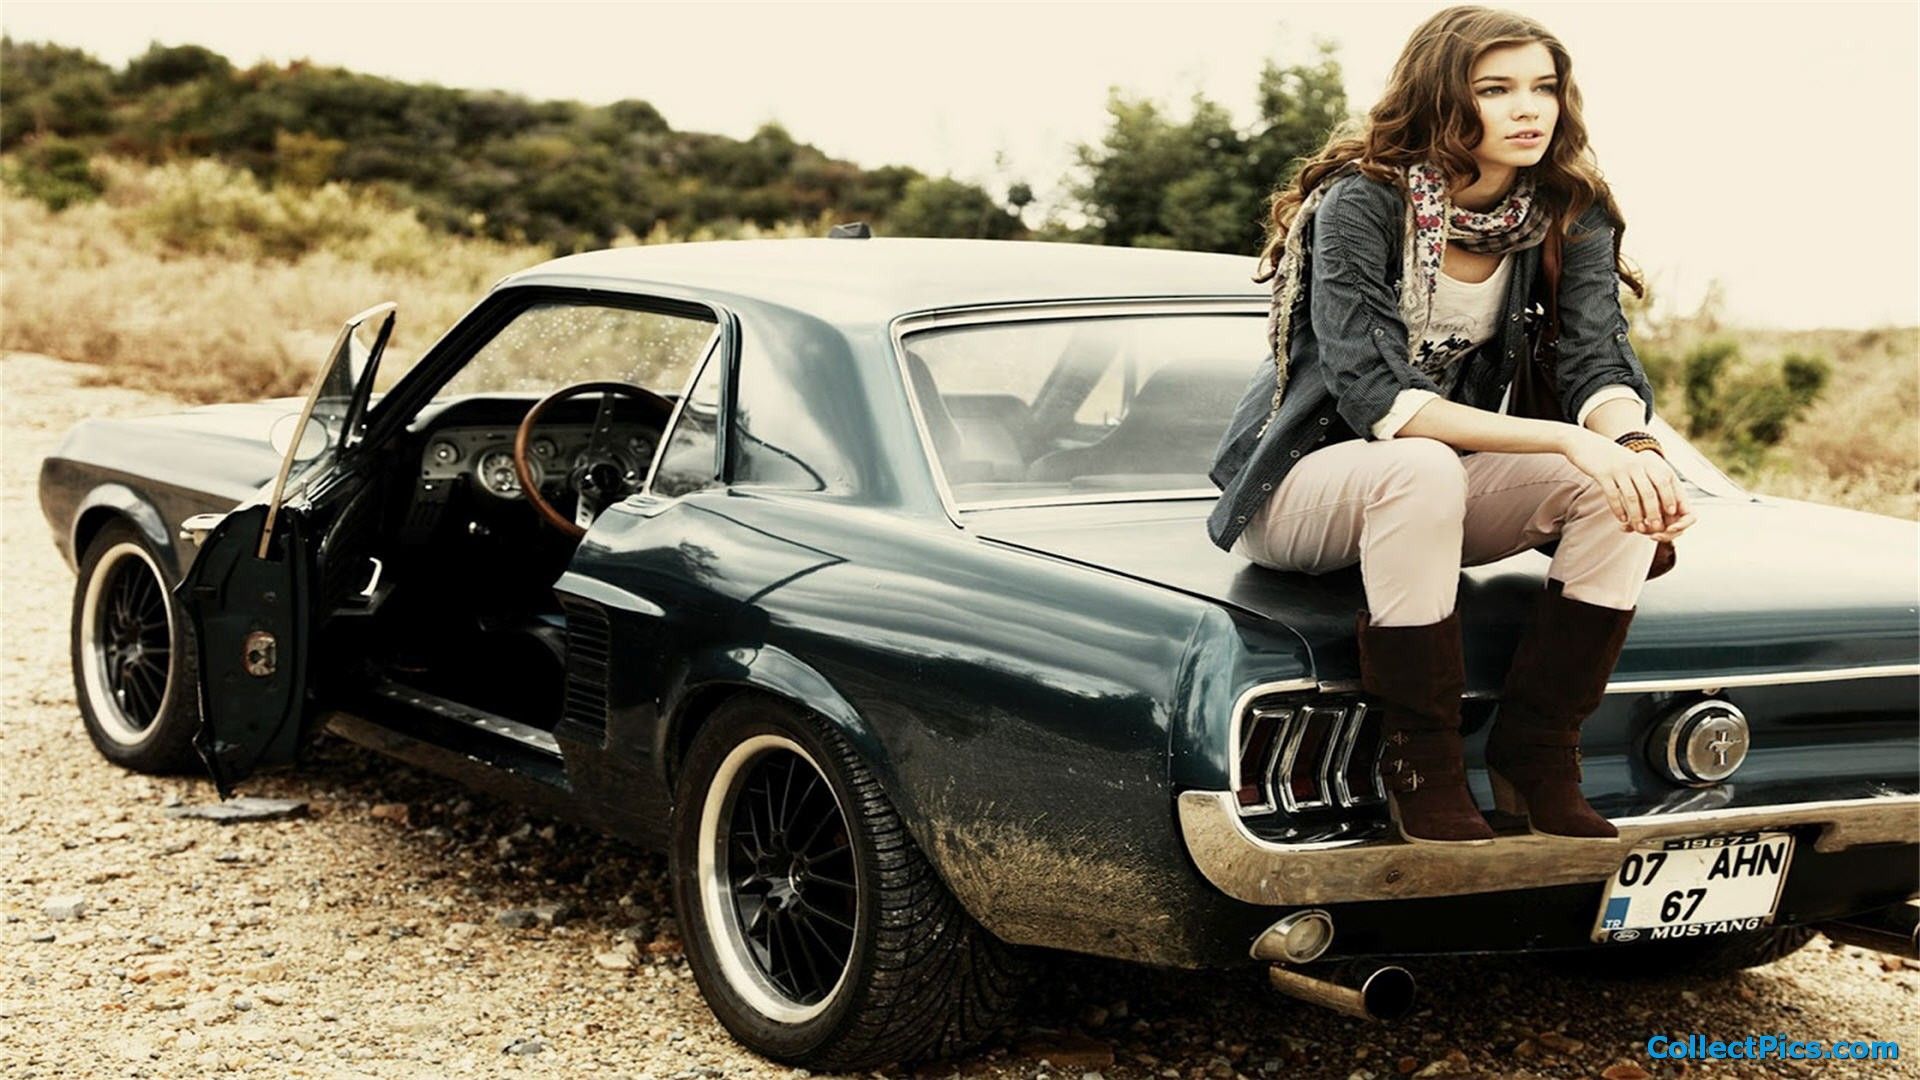 Car Girl HD Backgrounds 16449 - HD Wallpapers Site